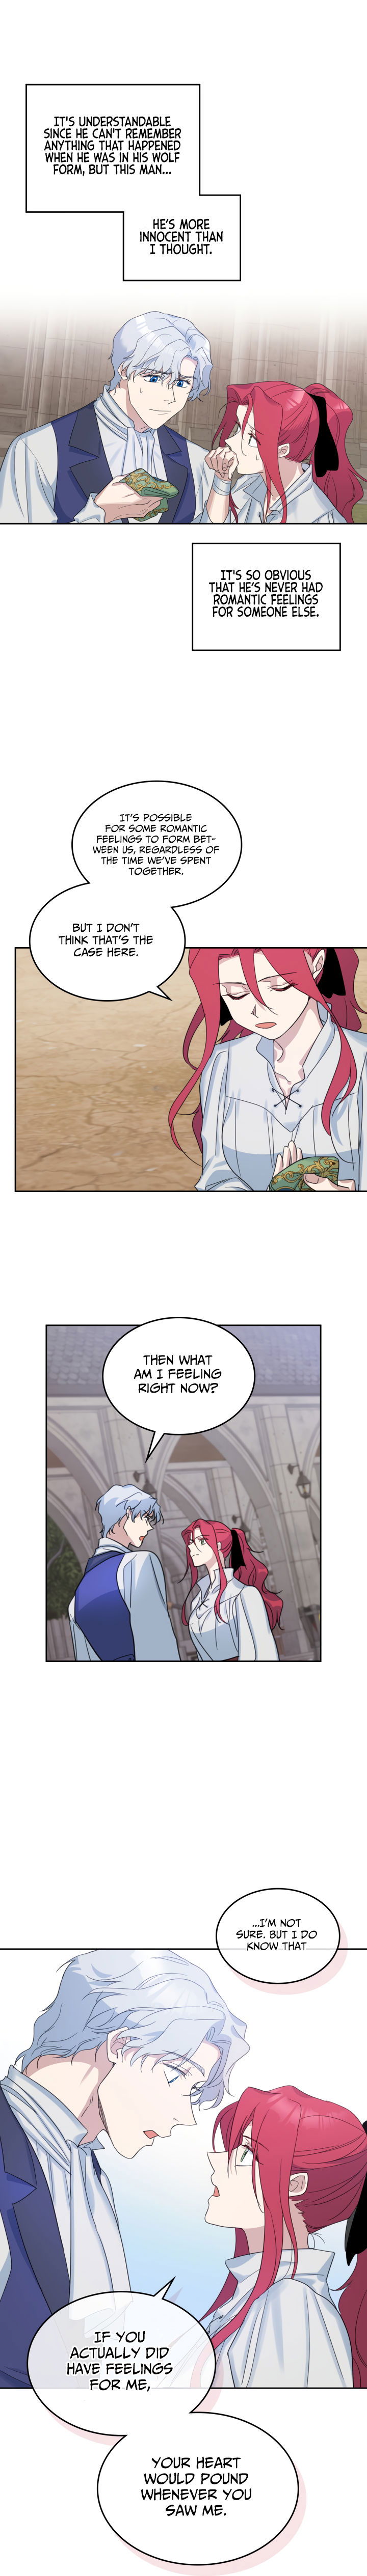 the-lady-and-the-beast-chap-41-11